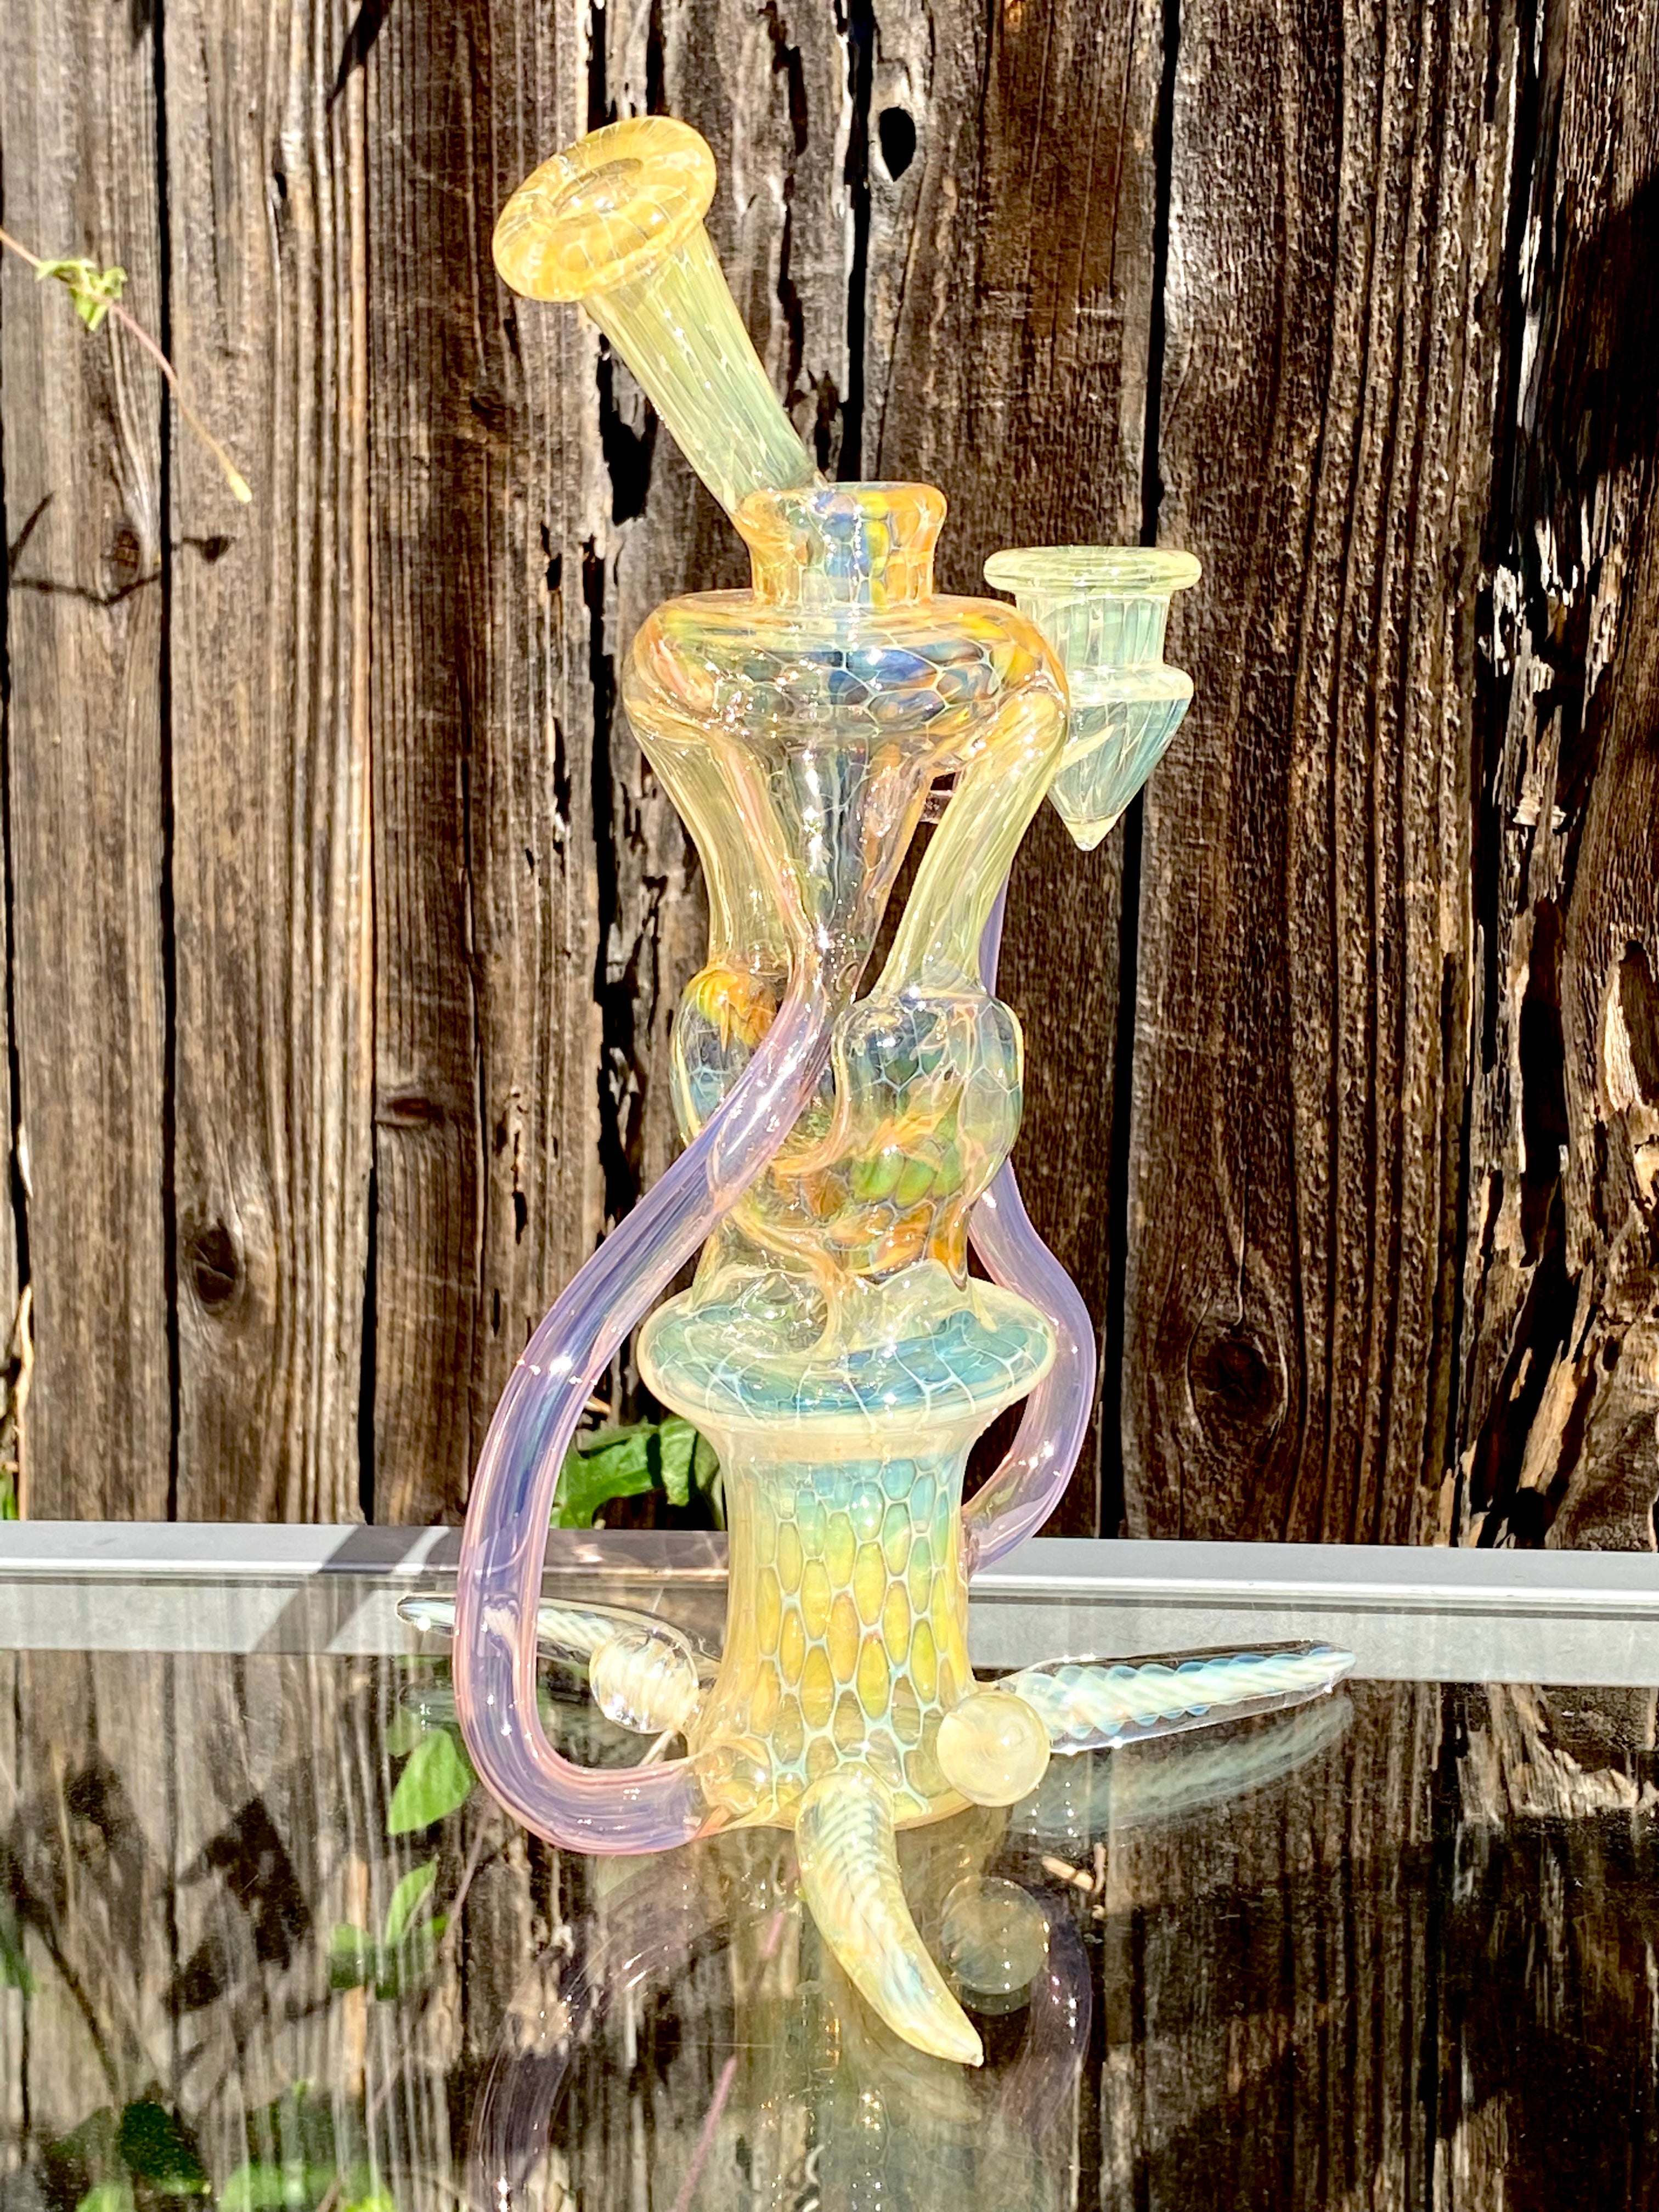 Jakers x Asthmatic Glasstastic Collab Double Uptake Fully Fumed Rig